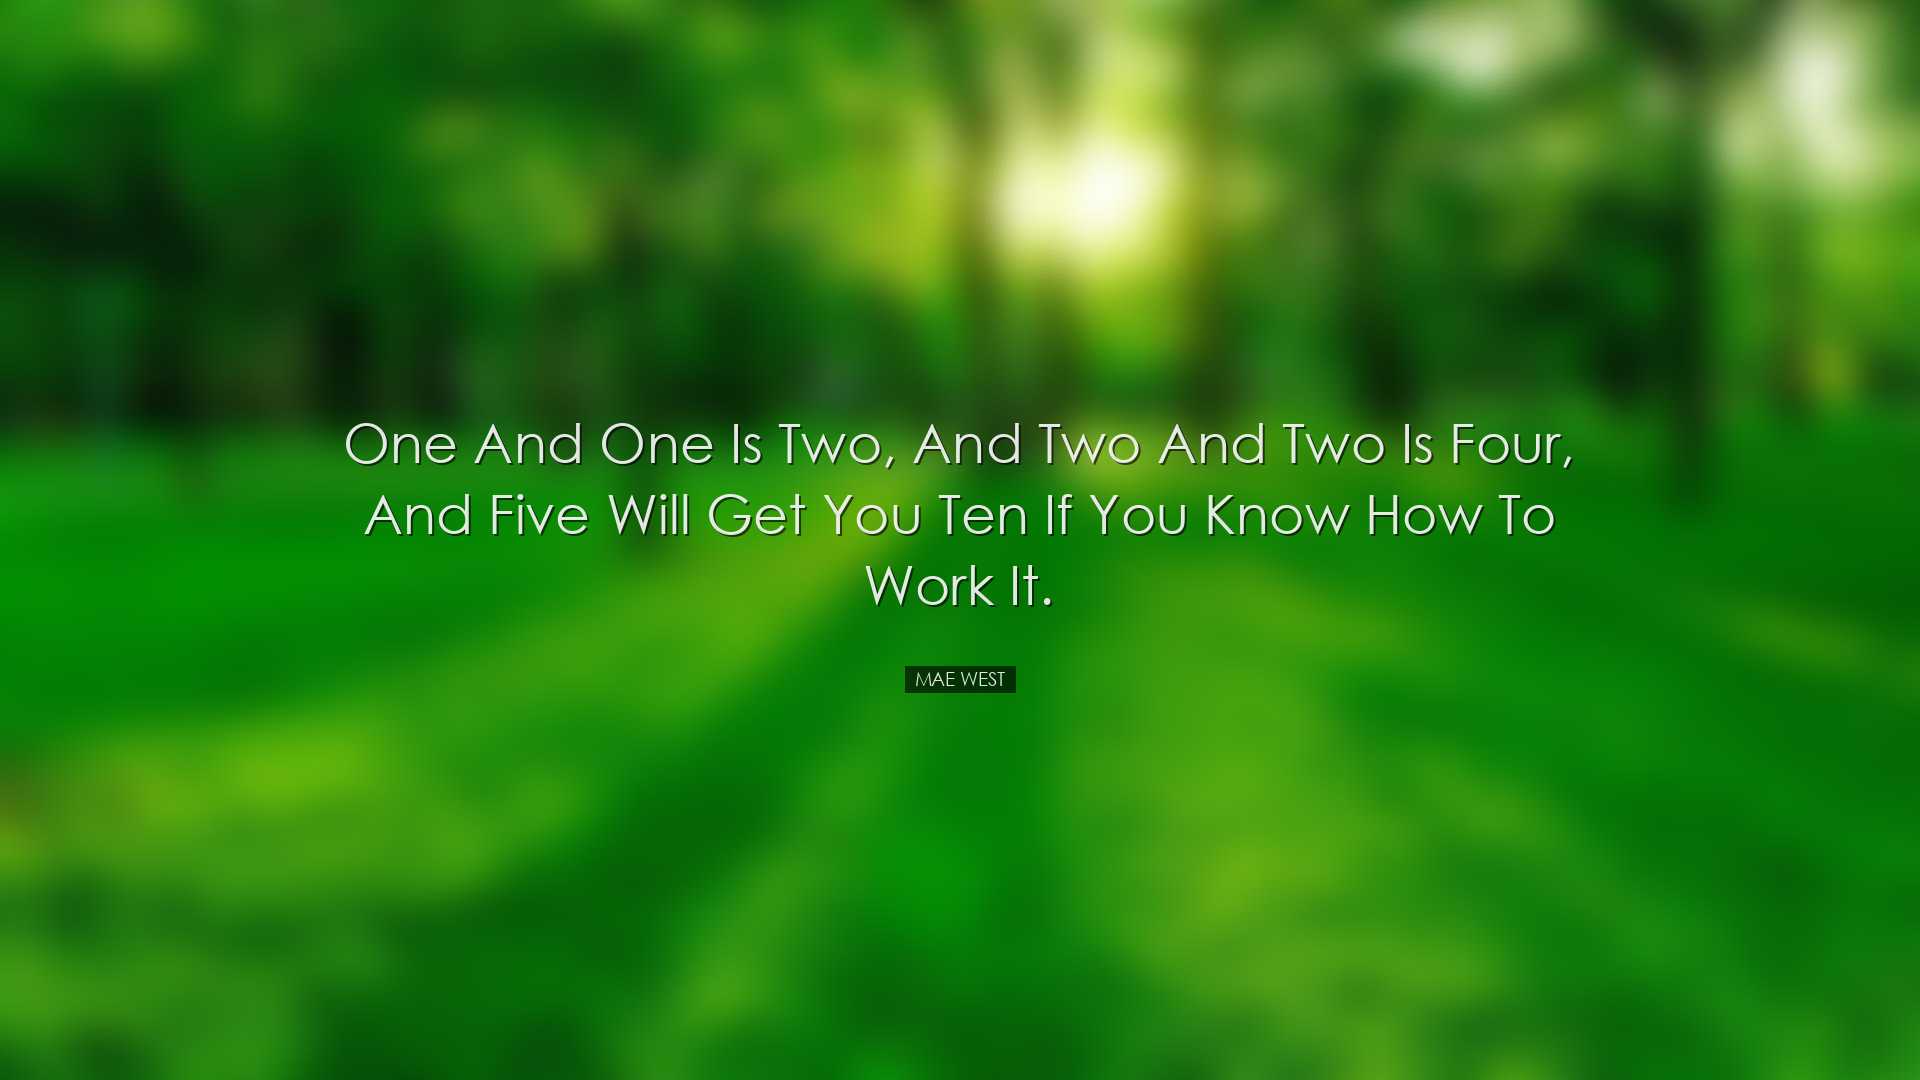 One and one is two, and two and two is four, and five will get you